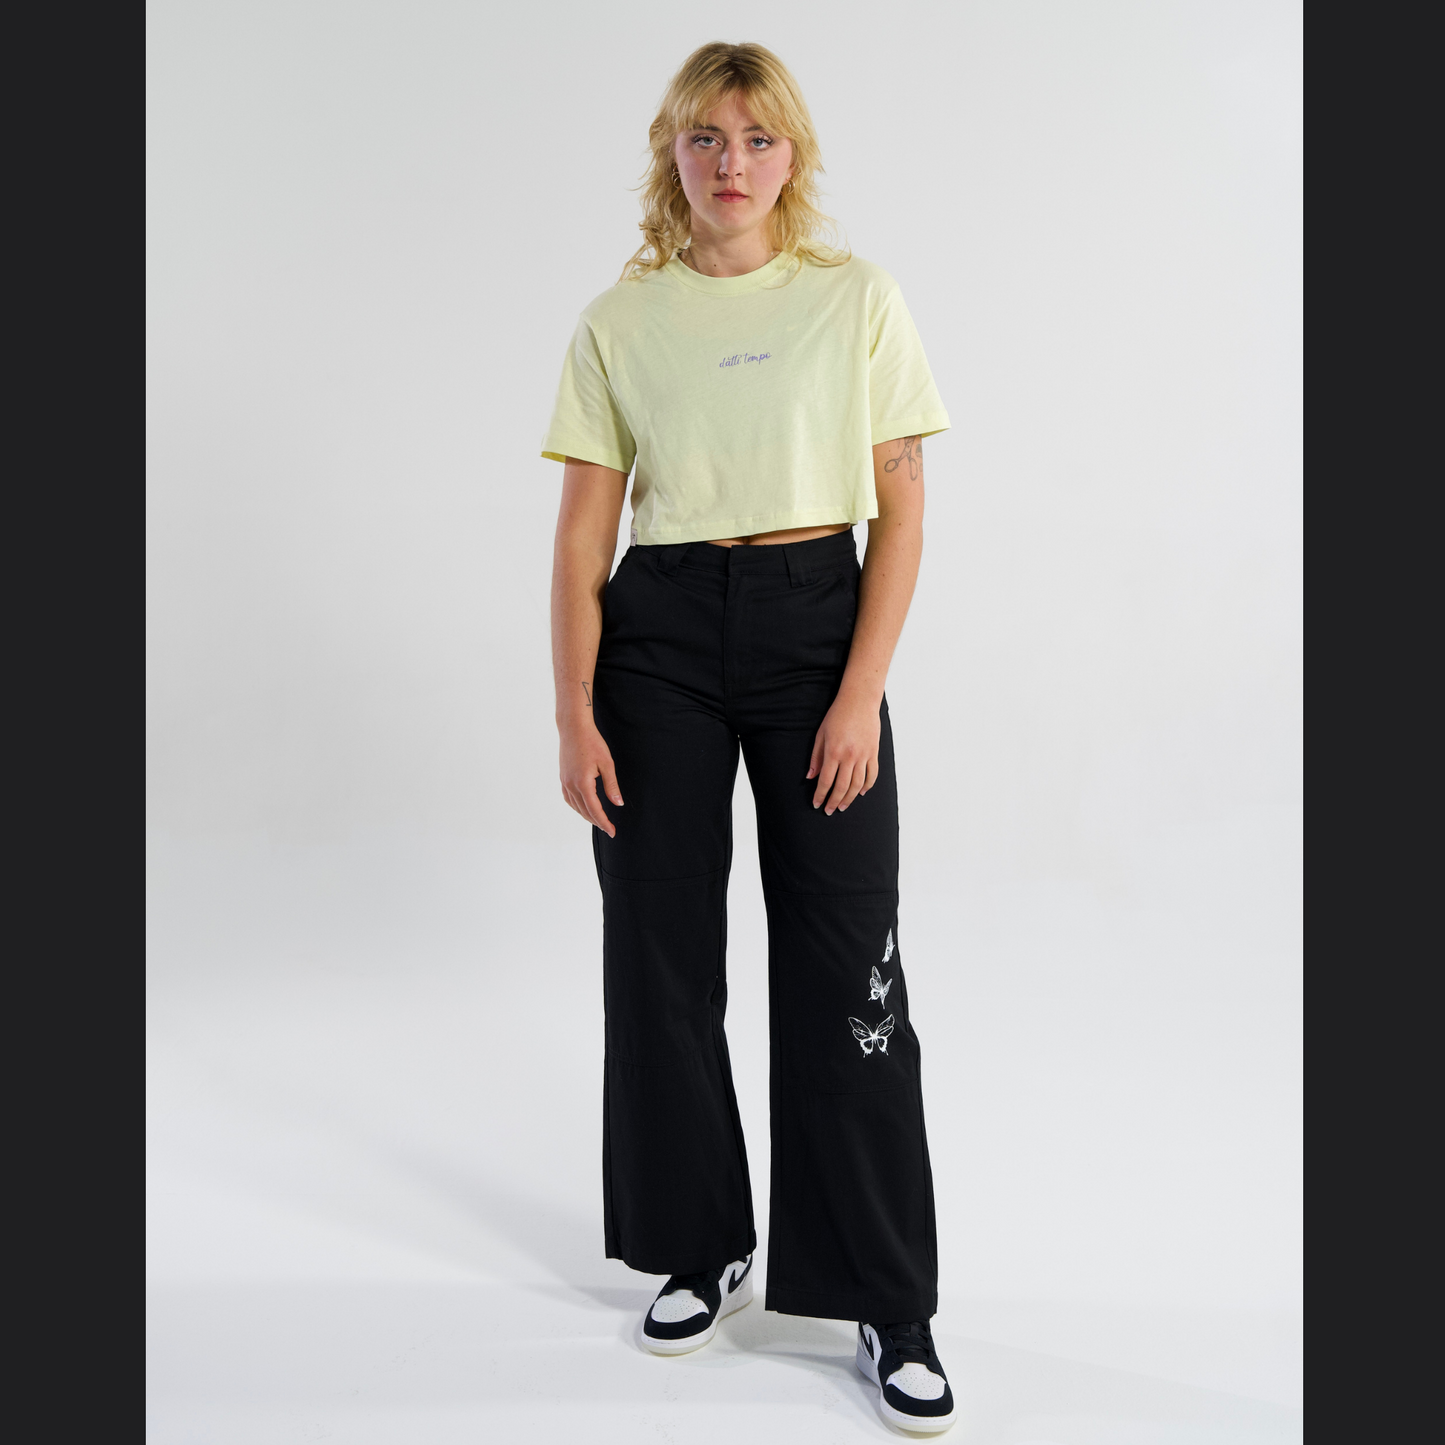 Cropped Tee Yellow